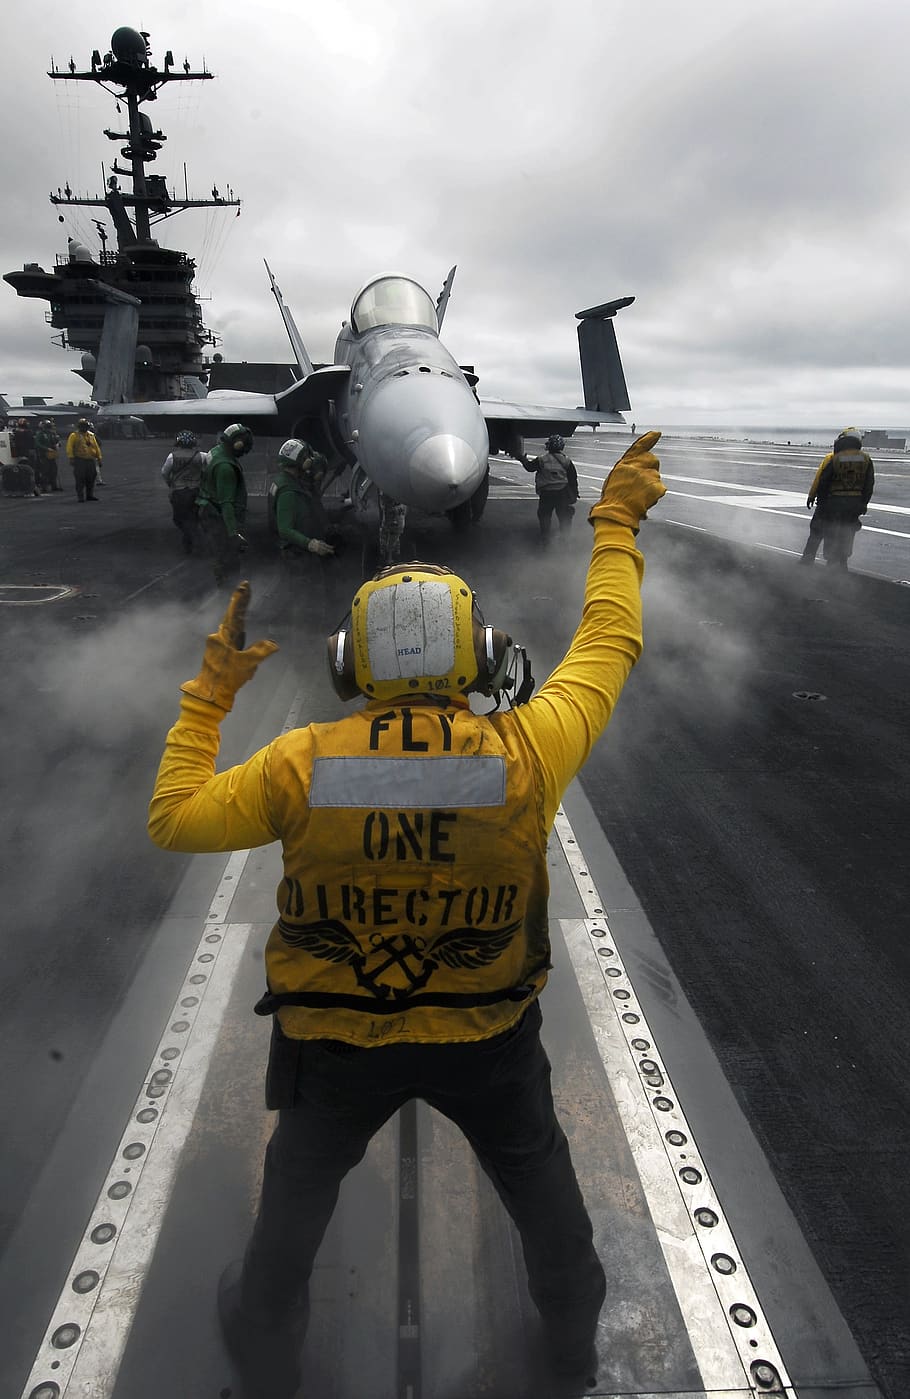 aircraft carrier, jet fighter, flight chief, deck, ship, sea, ocean, water, military, us navy